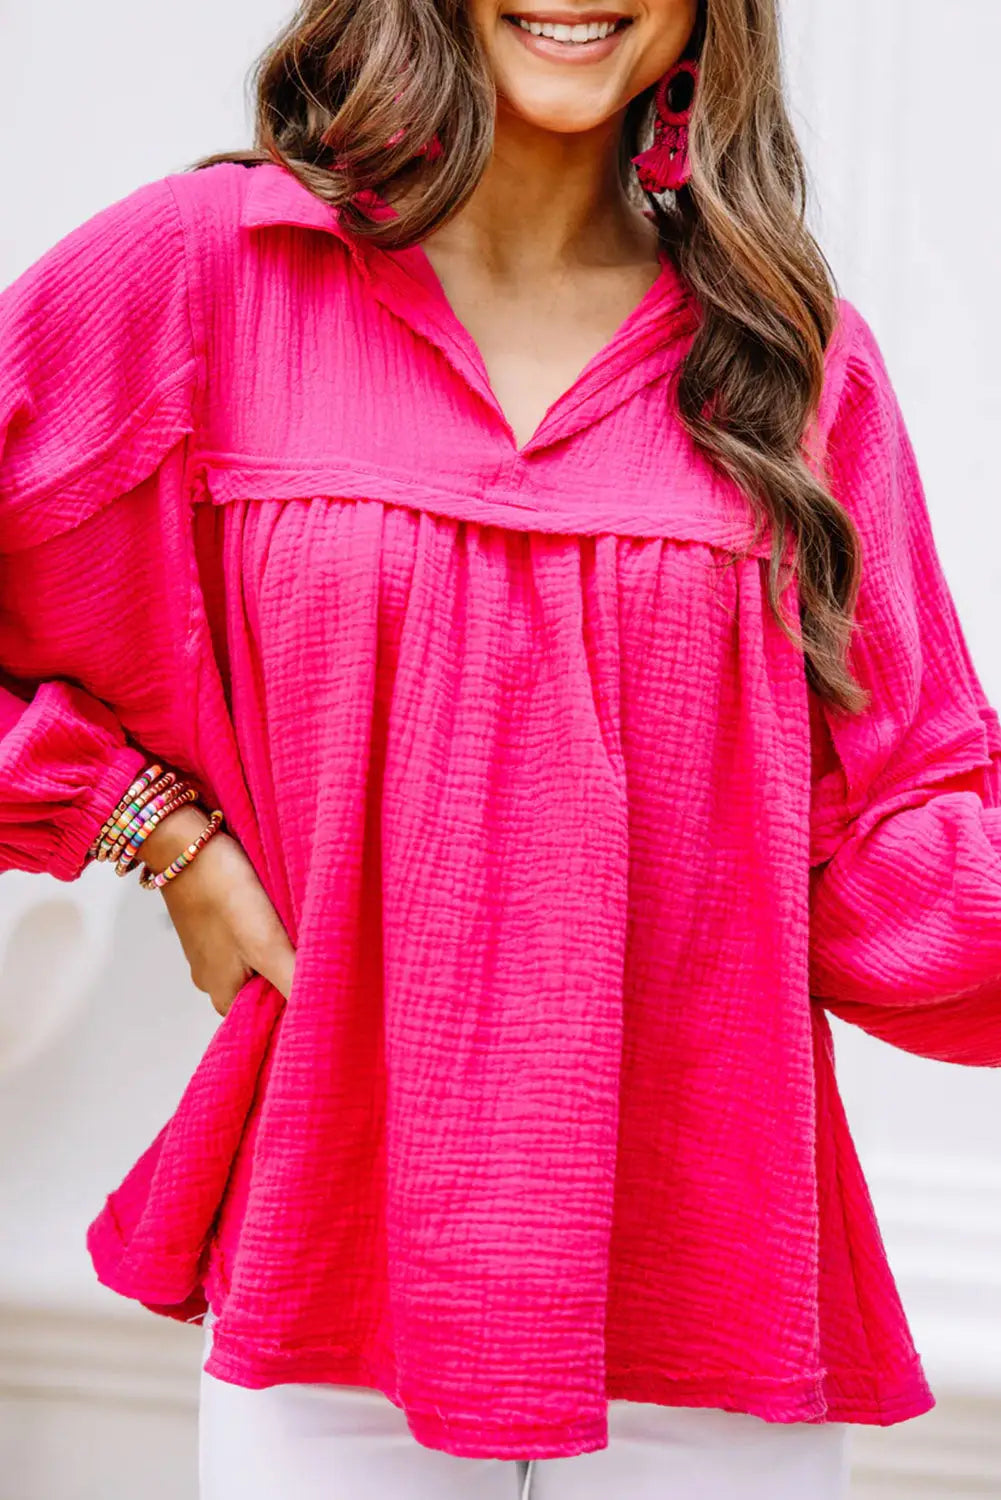 Rose crinkle collared v-neck bubble sleeve flowy blouse - s / 100% cotton - tops